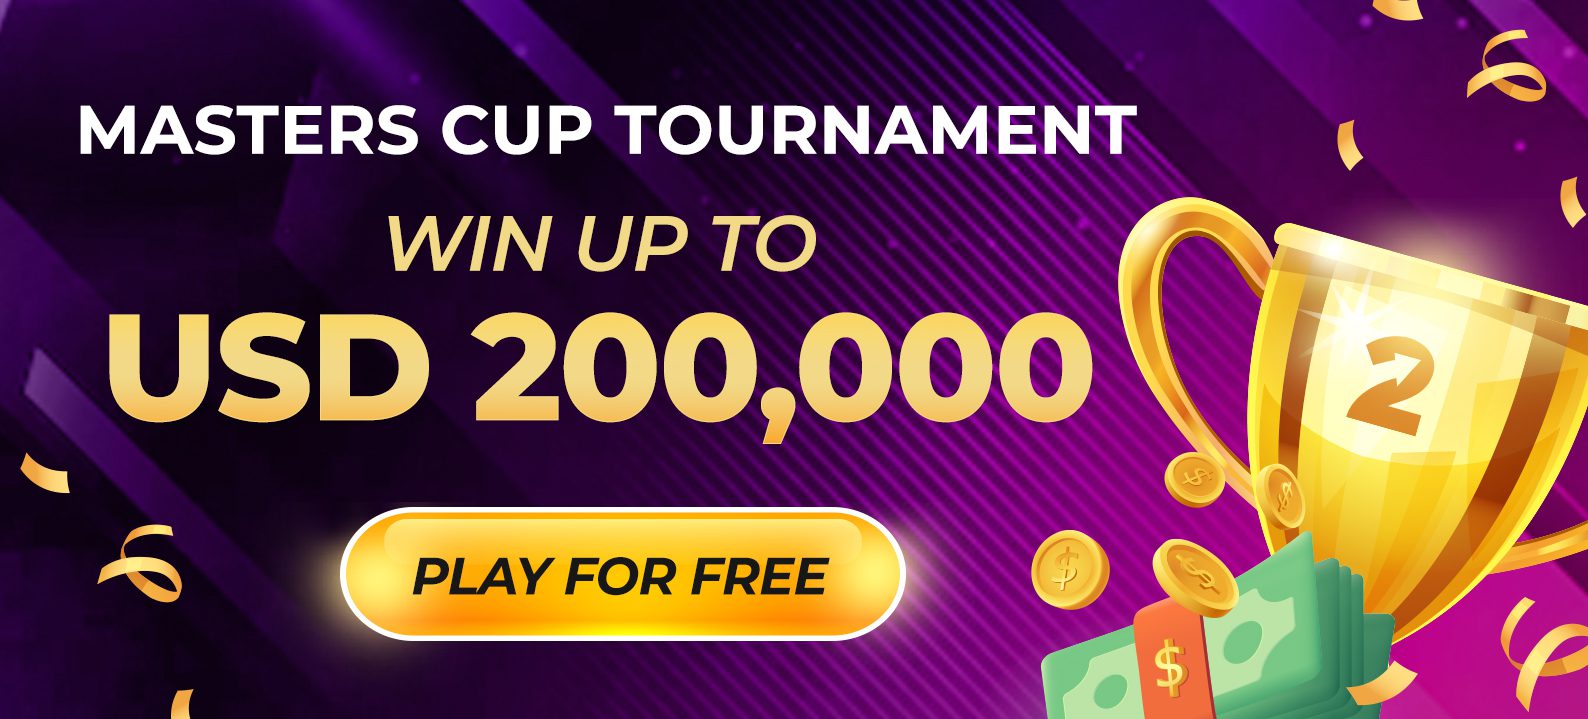 Masters Cup Tournament Win Up to USD 200,000